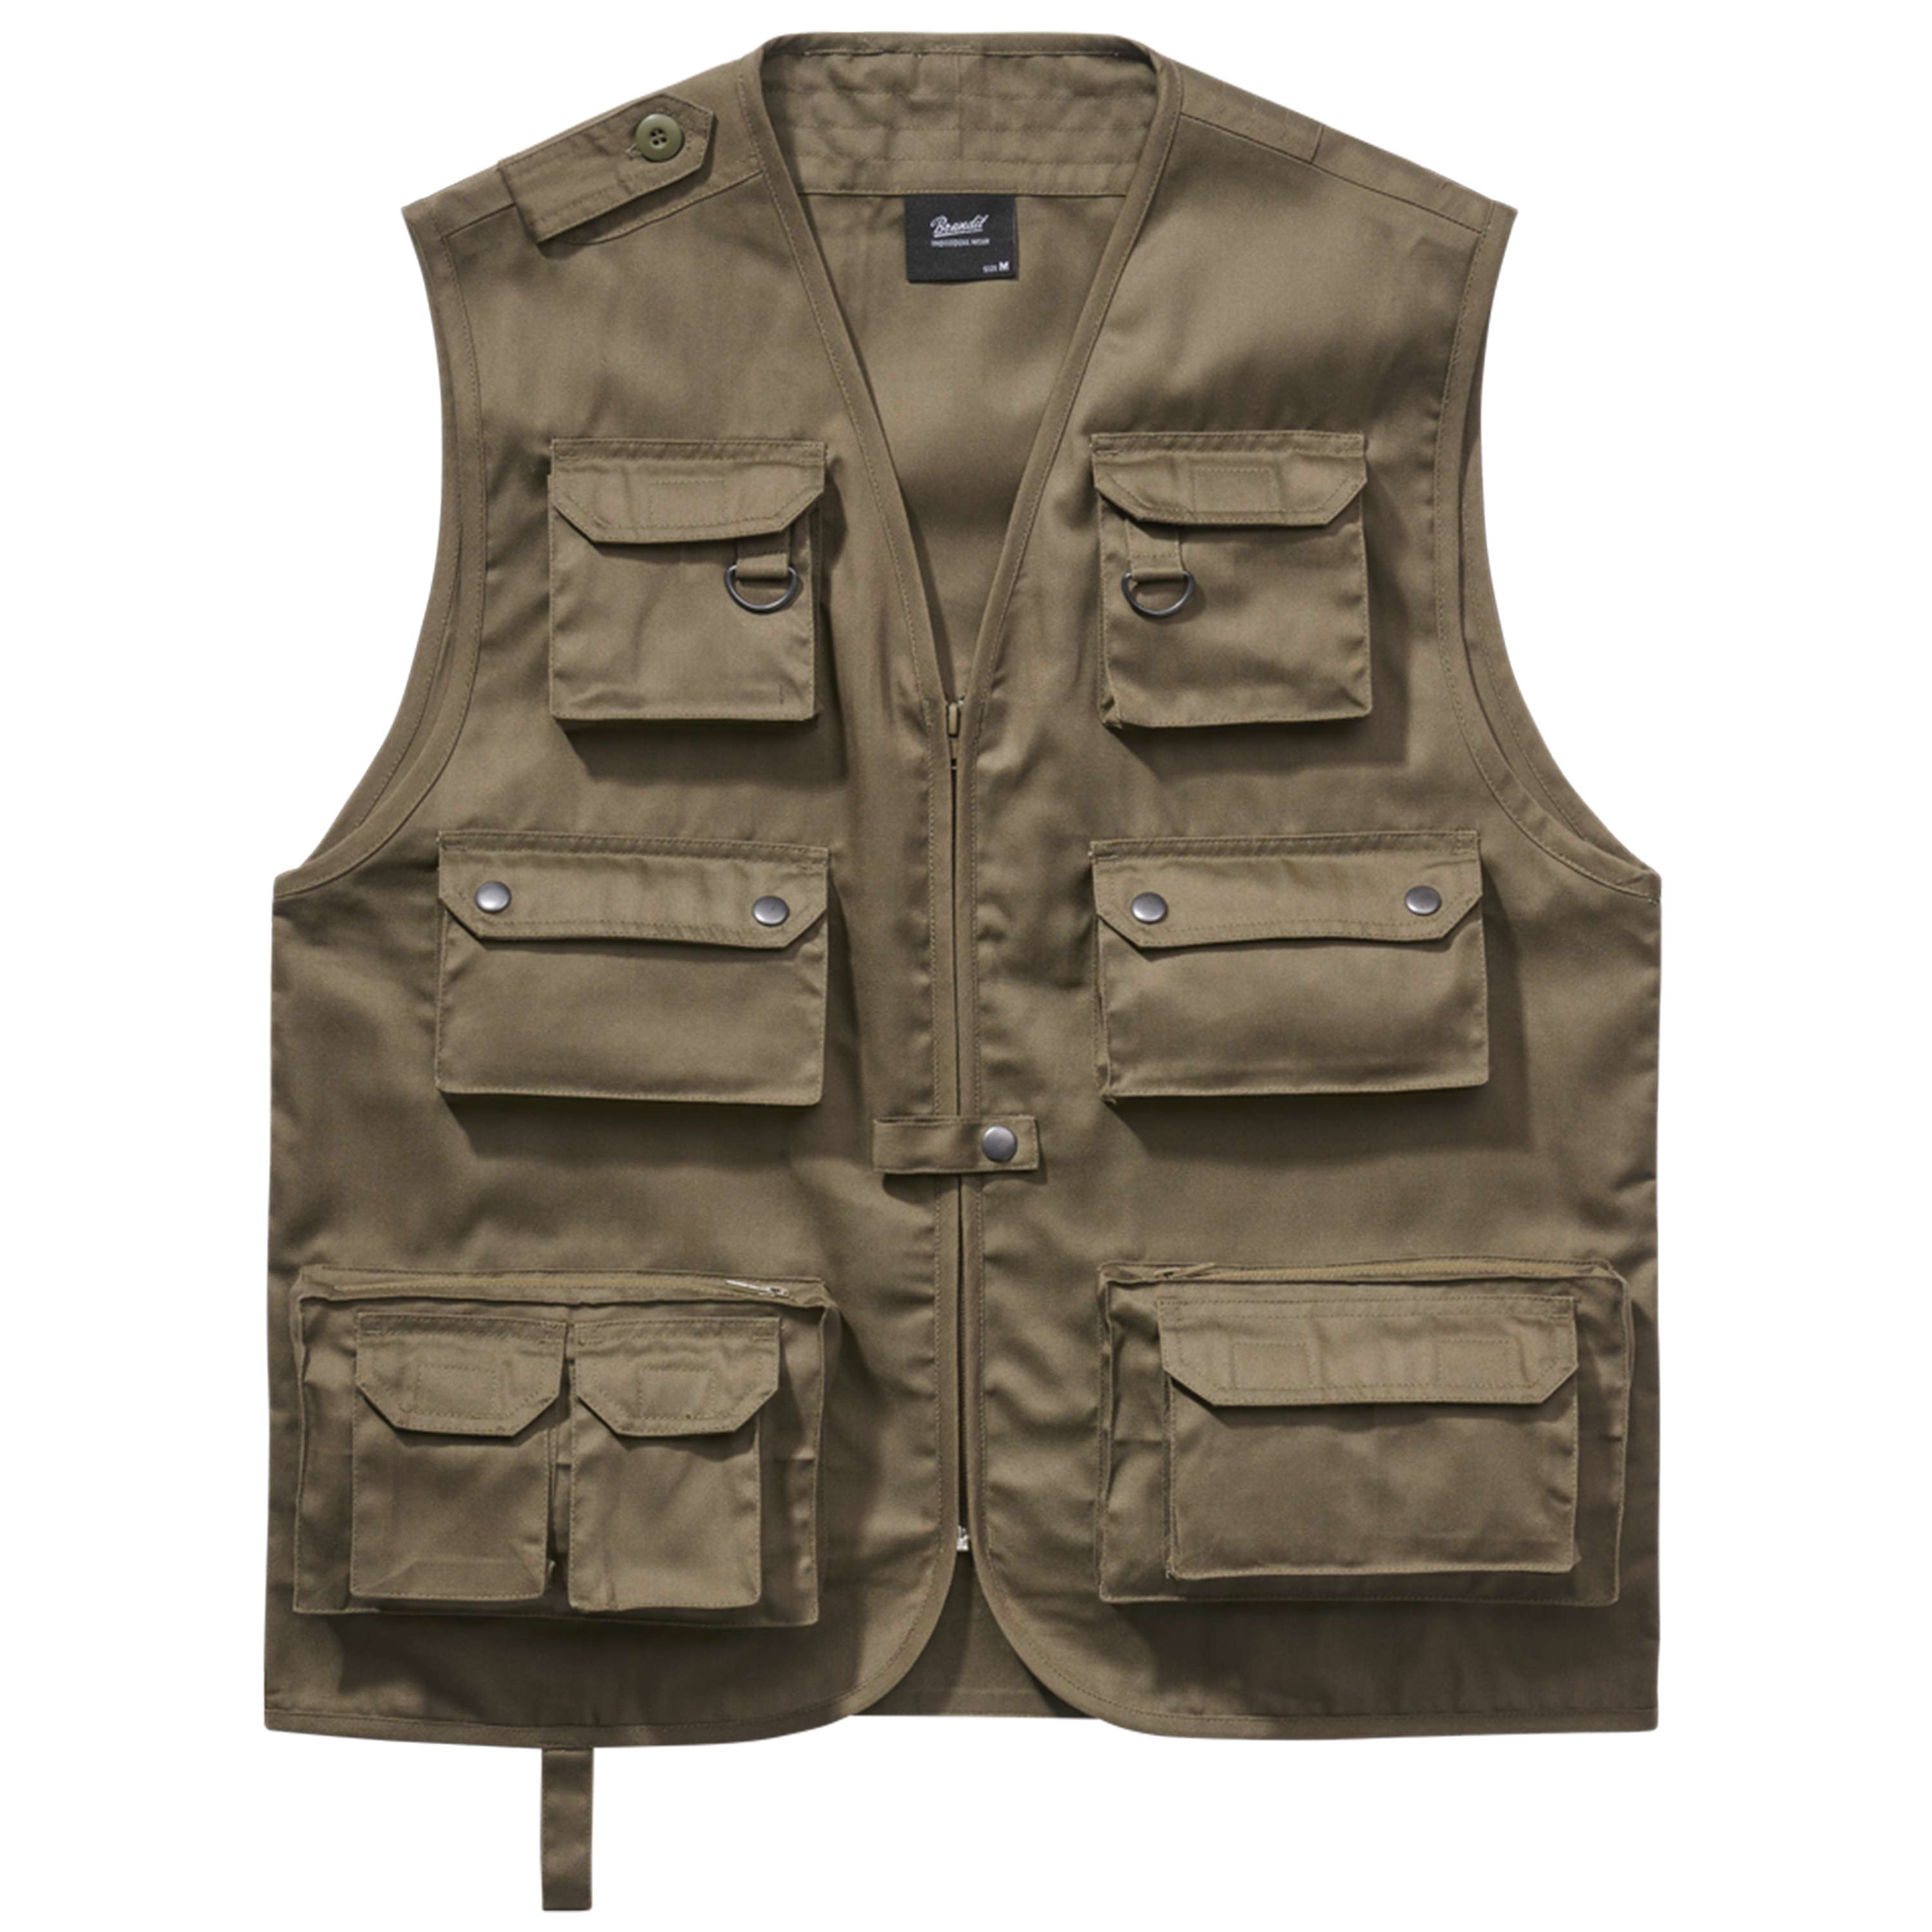 Purchase the olive Brandit ASMC by Vest Hunting